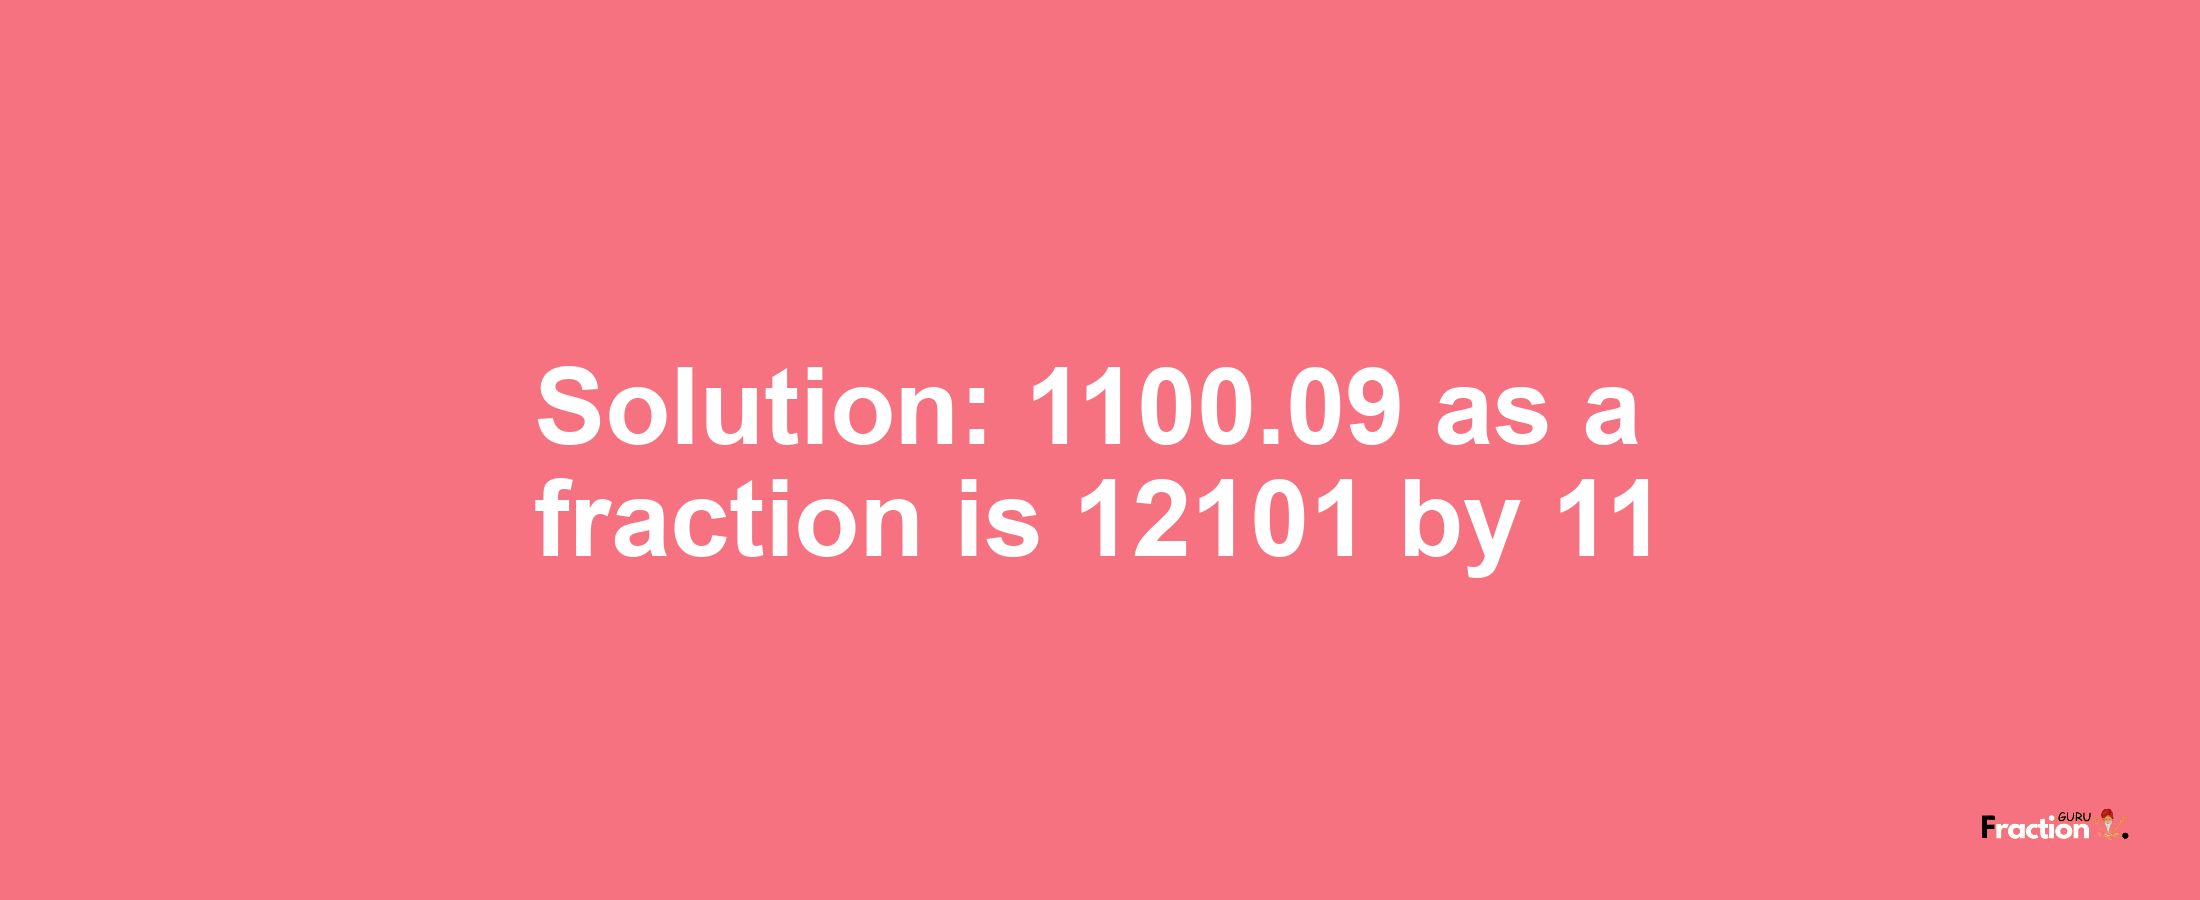 Solution:1100.09 as a fraction is 12101/11